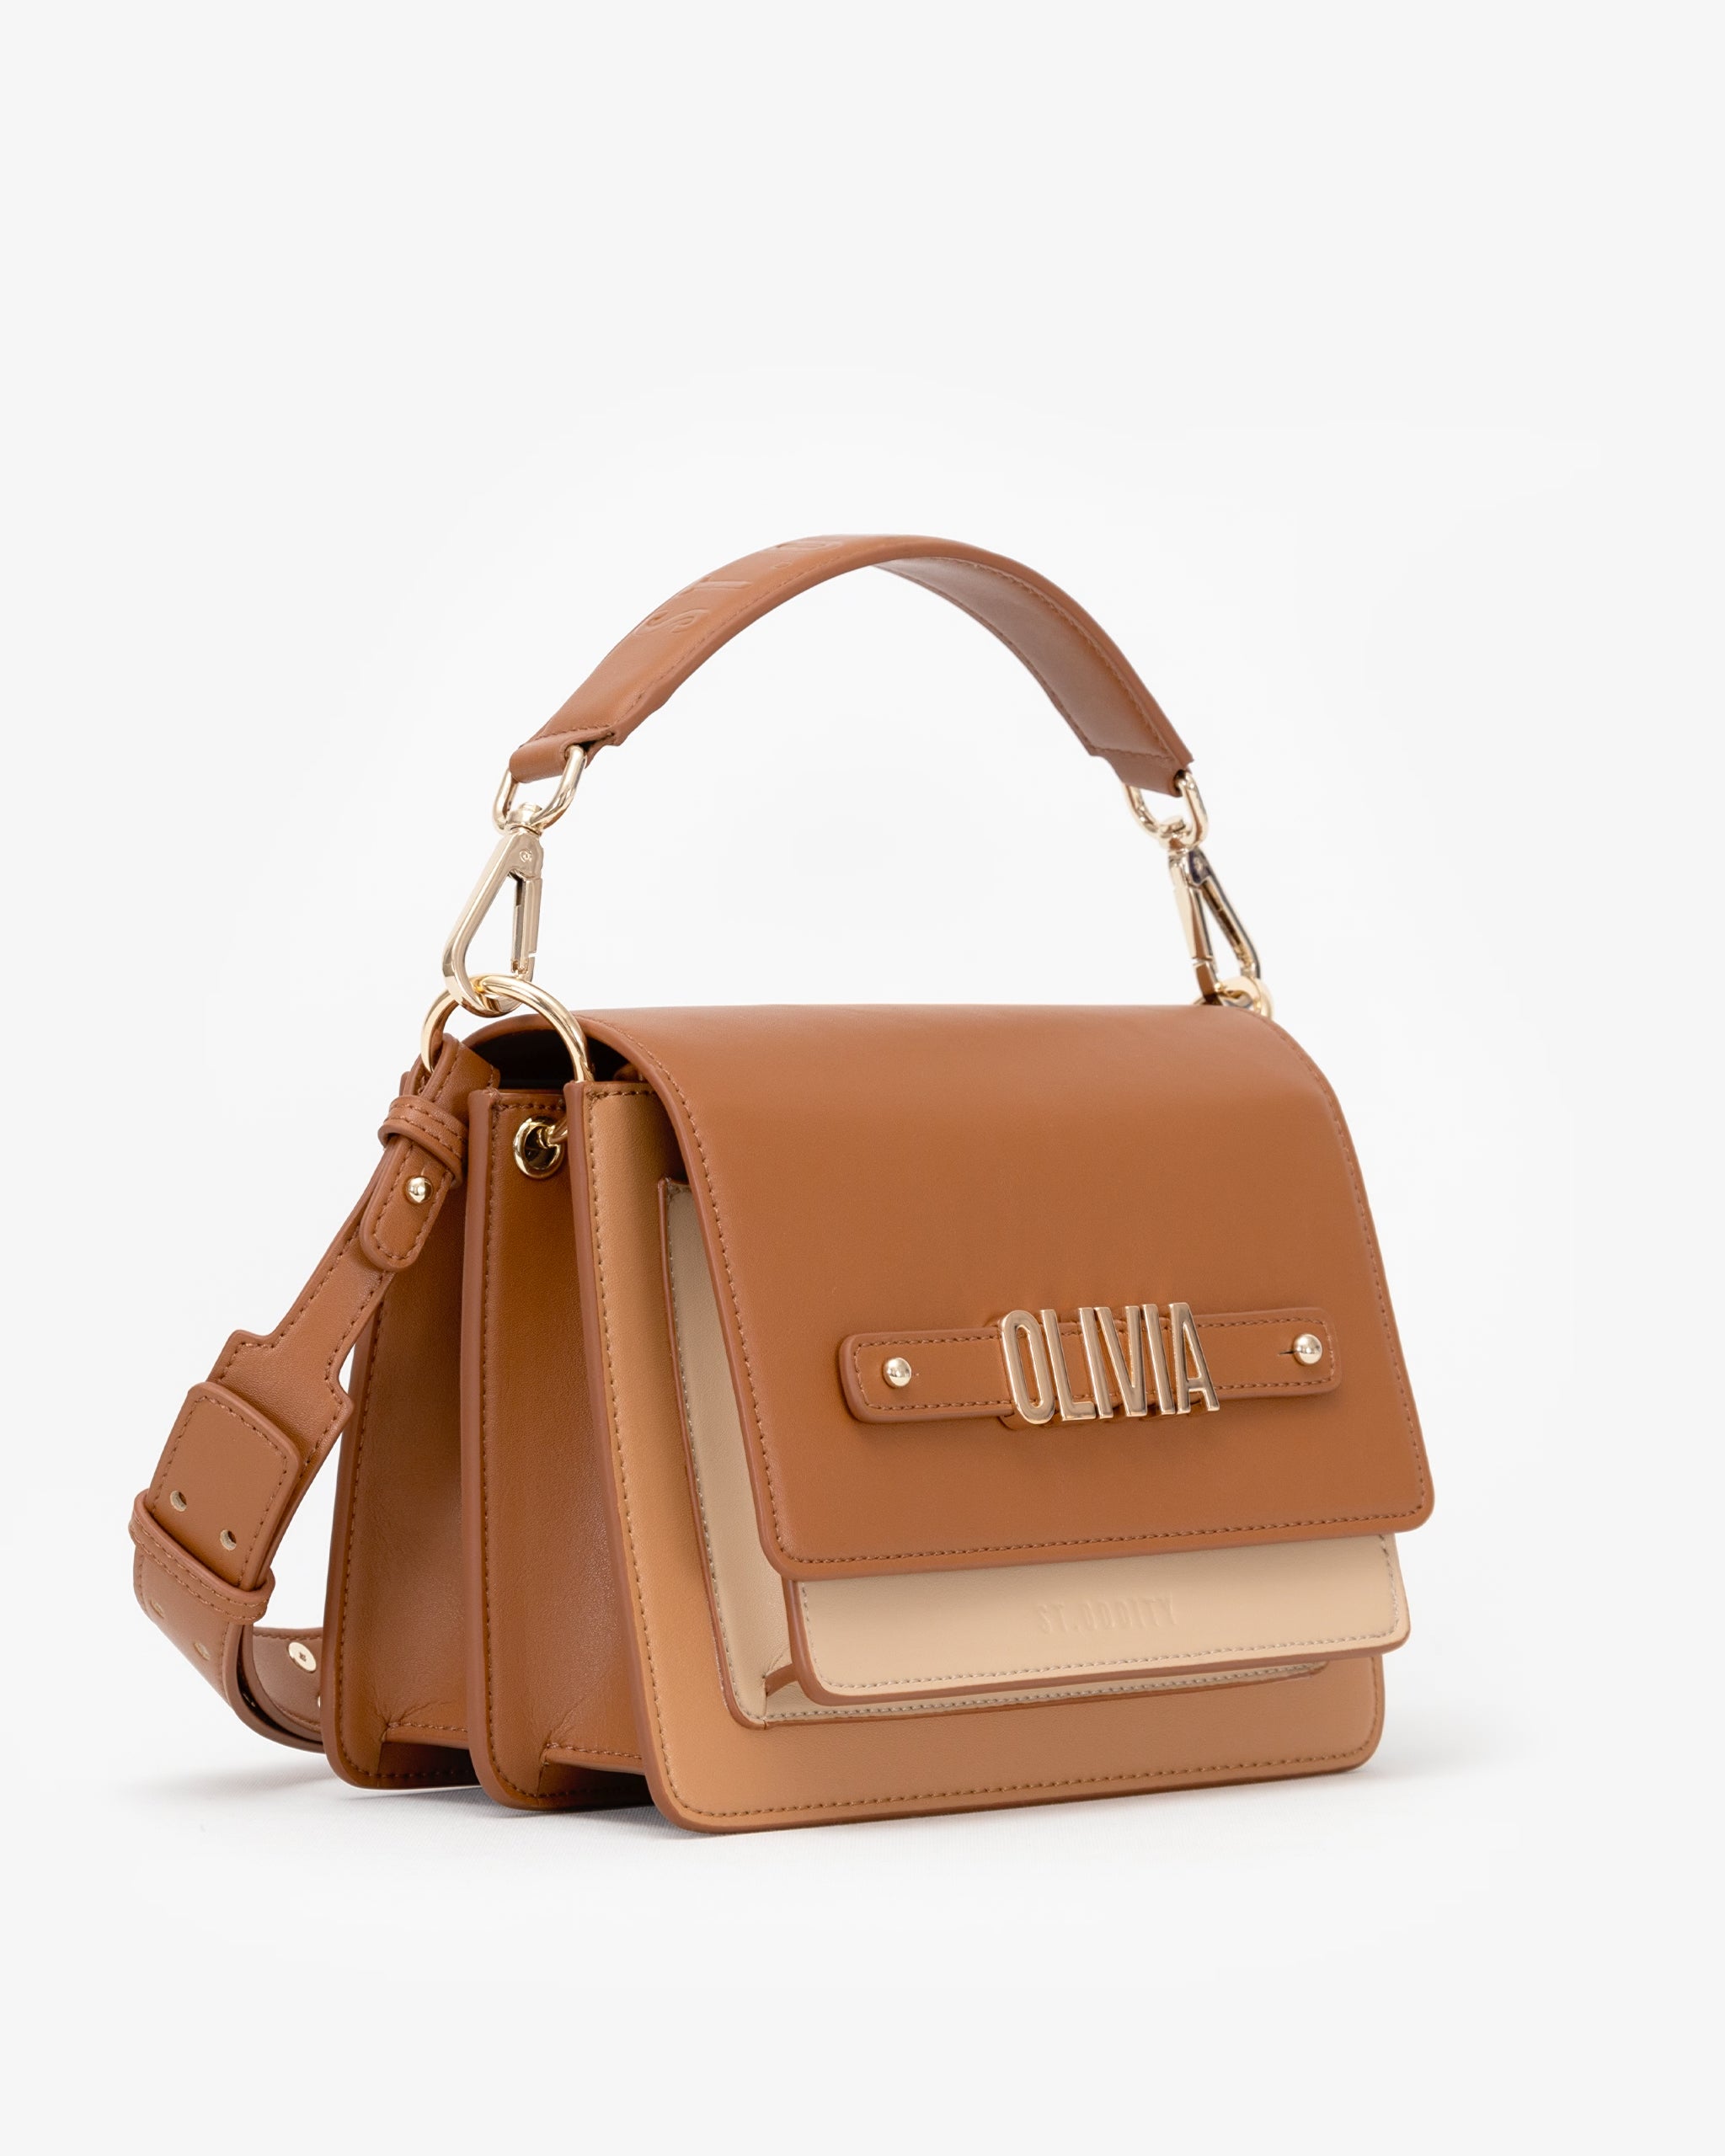 Pre-order (Mid-May): Shoulder Bag in Neutral Multi with Personalised Hardware